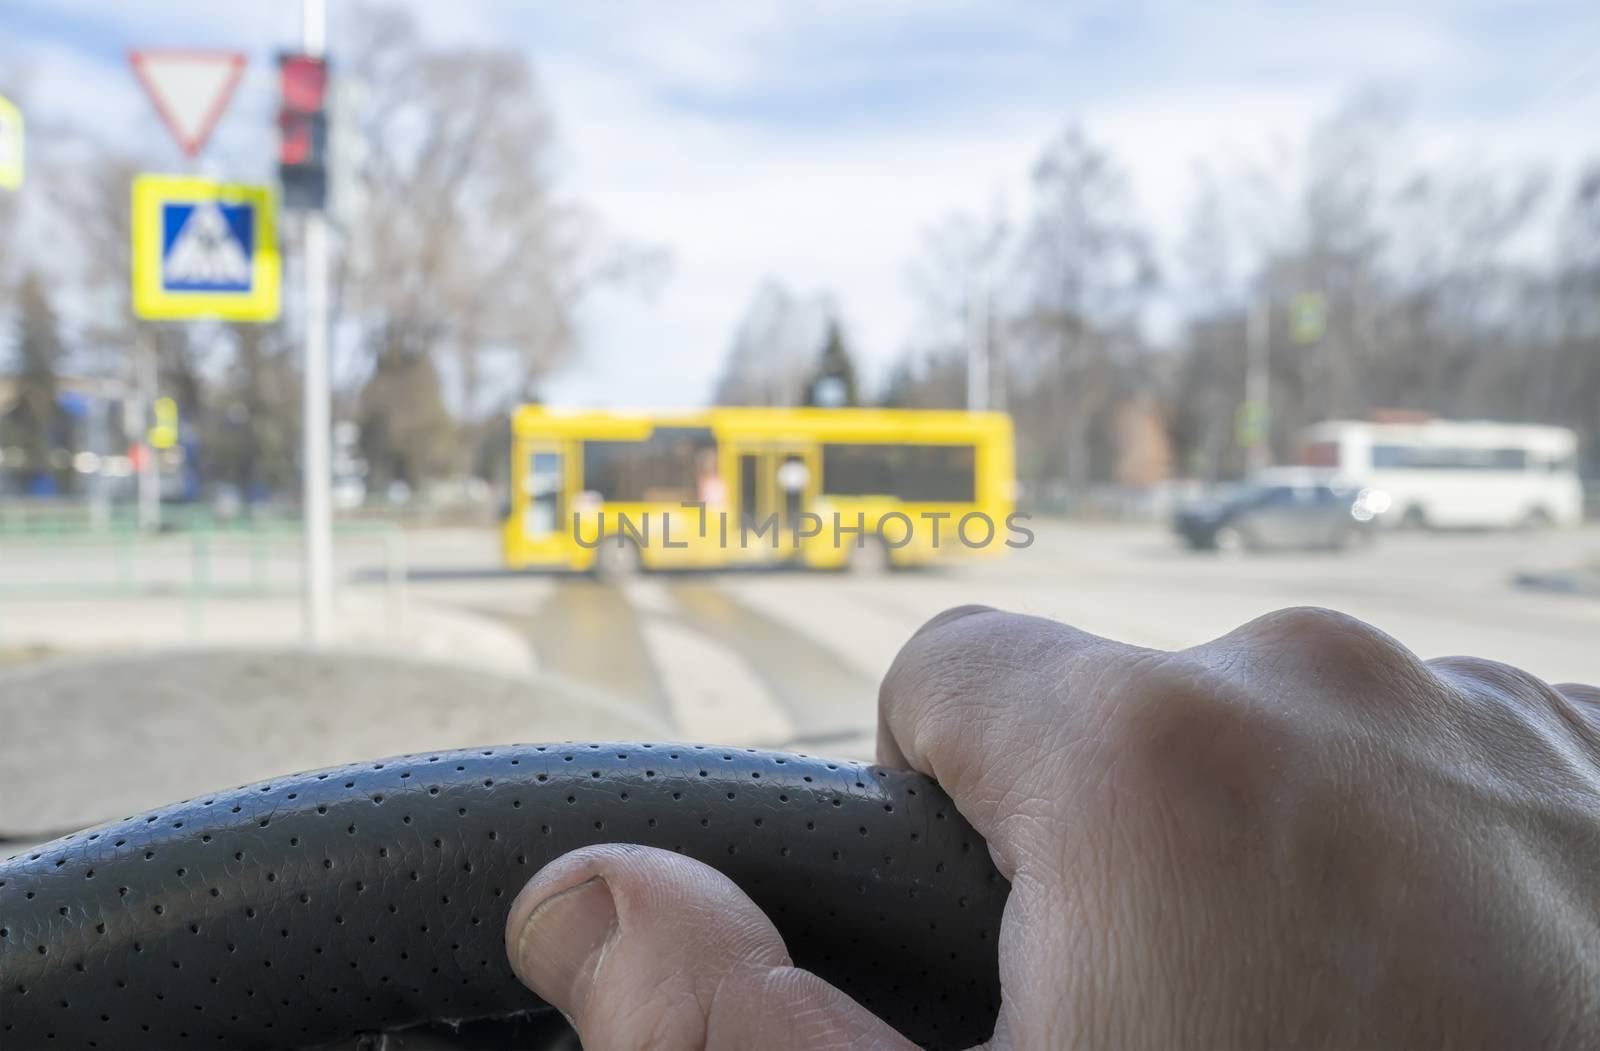 the driver hand on the steering wheel of a car located in front of a red prohibiting traffic light, pedestrian crosswalk, and cars that the driver gives way to